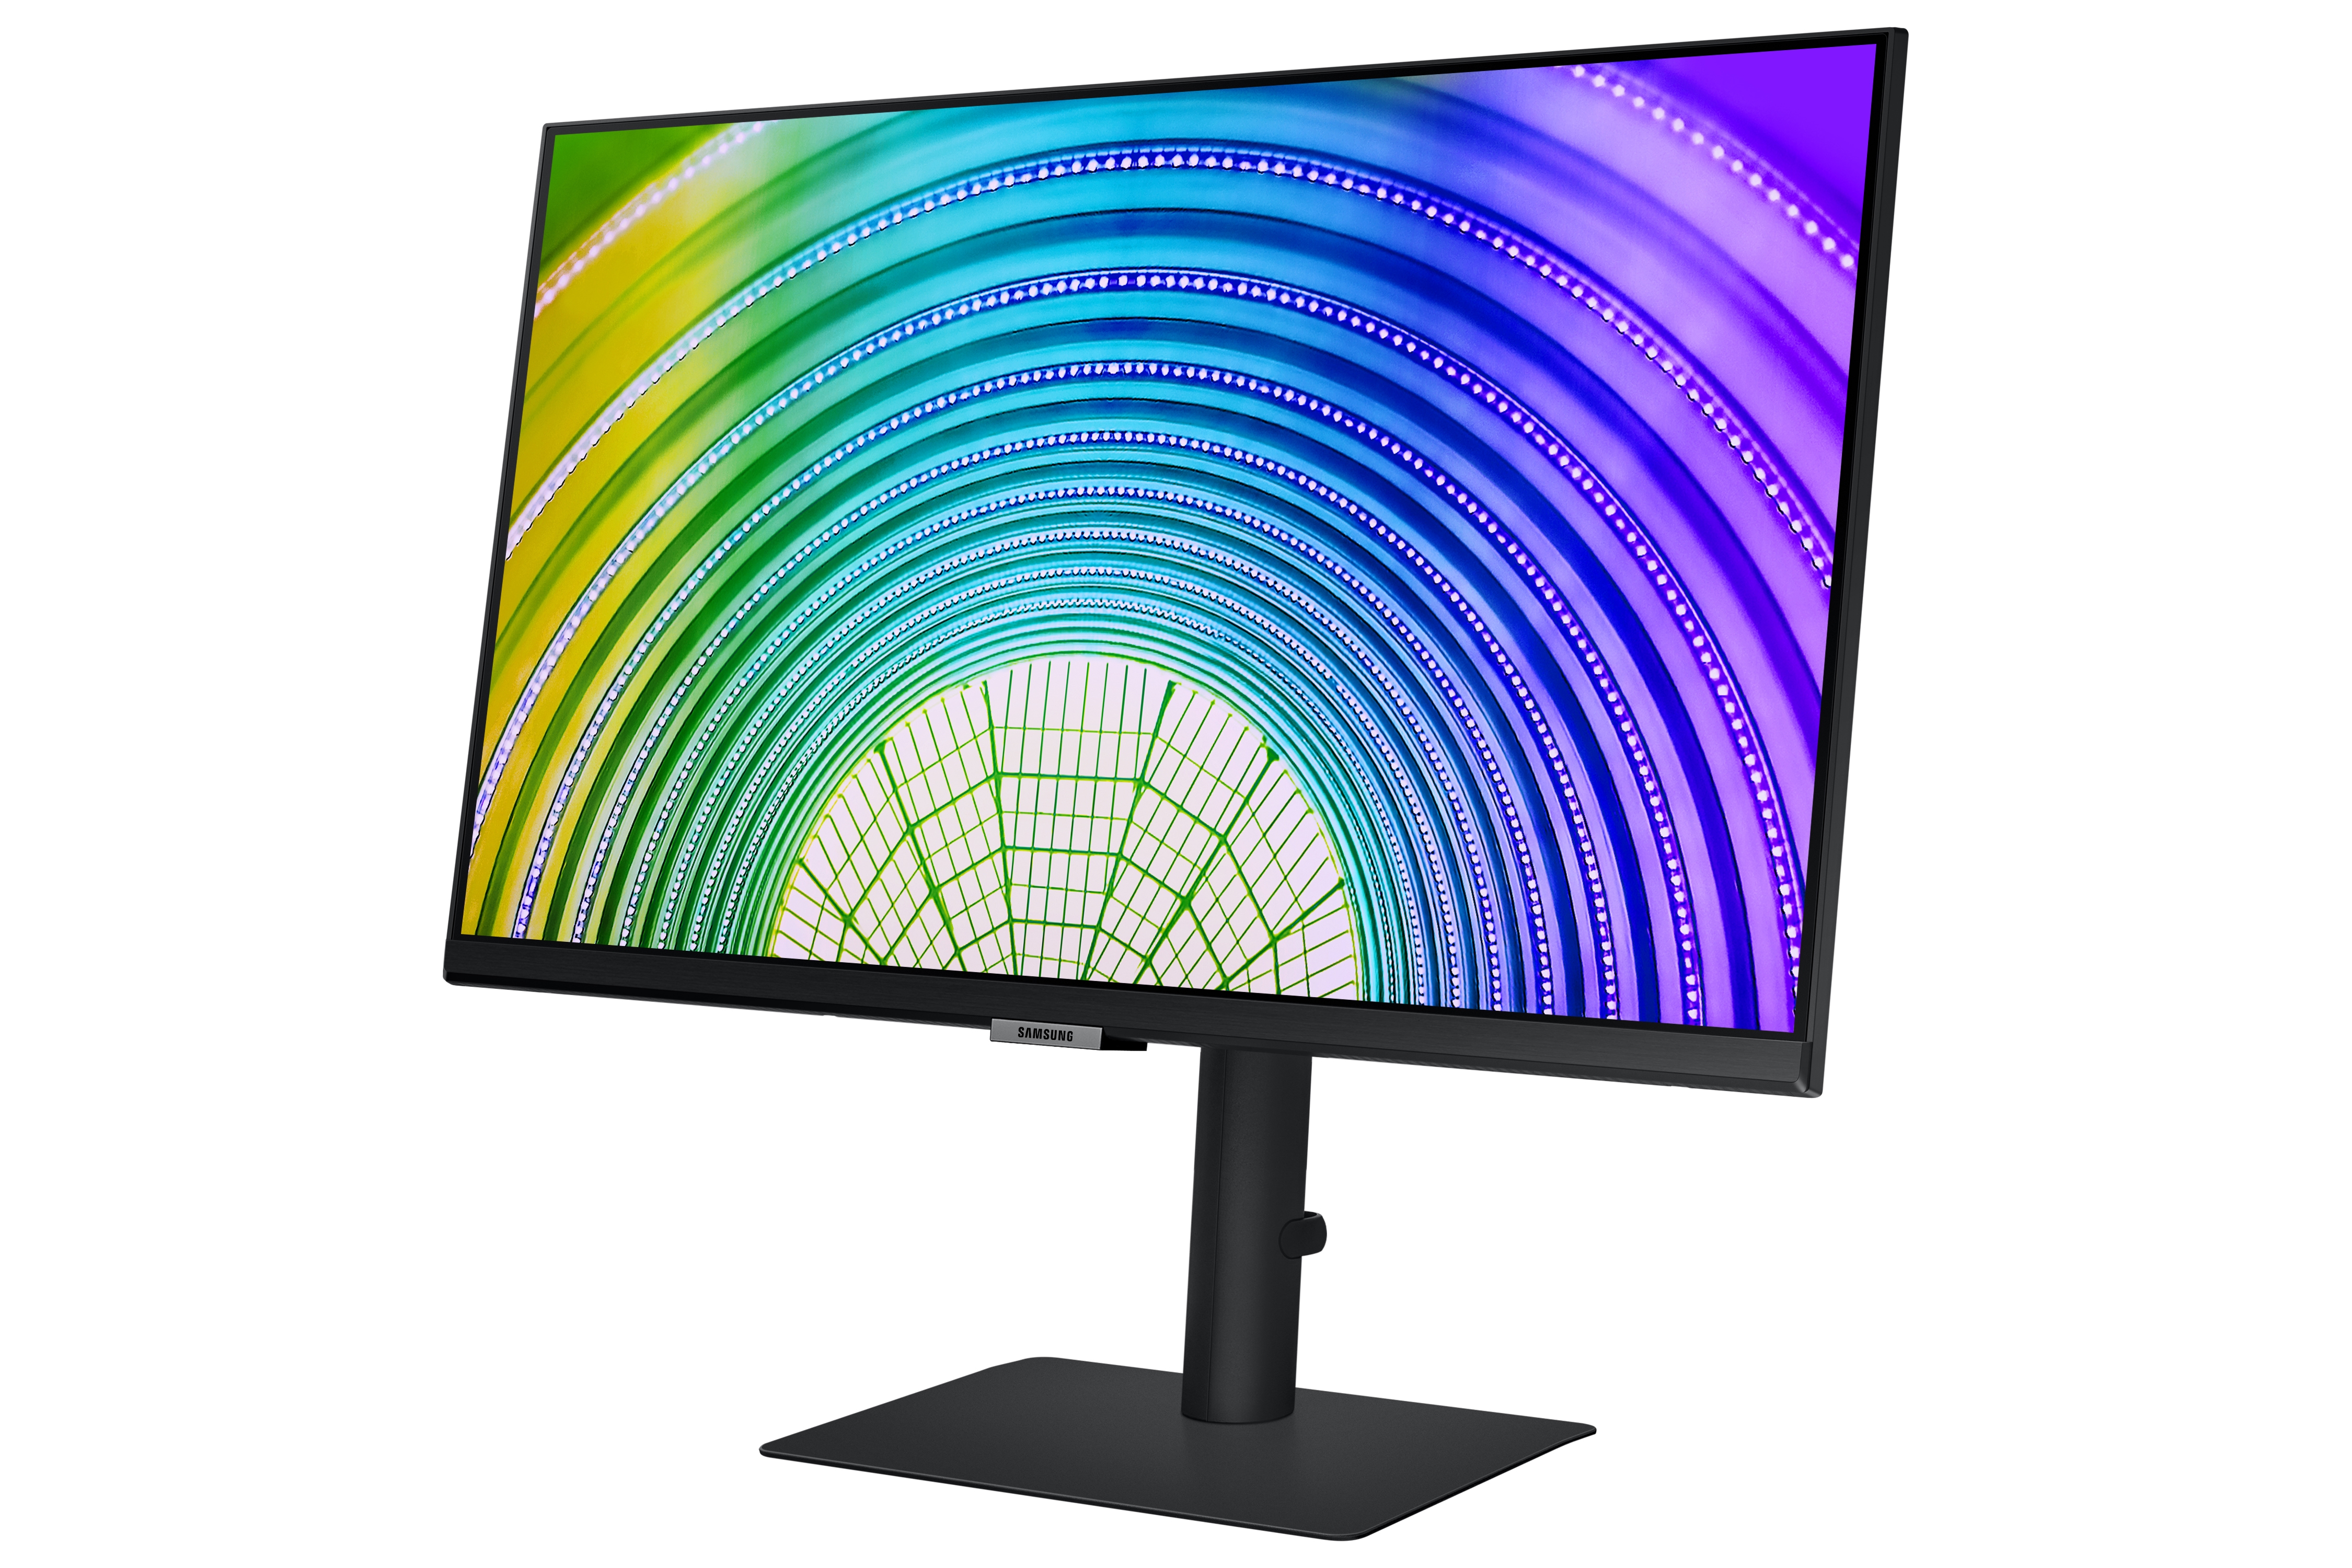 Samsung launches SD850 new 27 and 32-inch Monitors